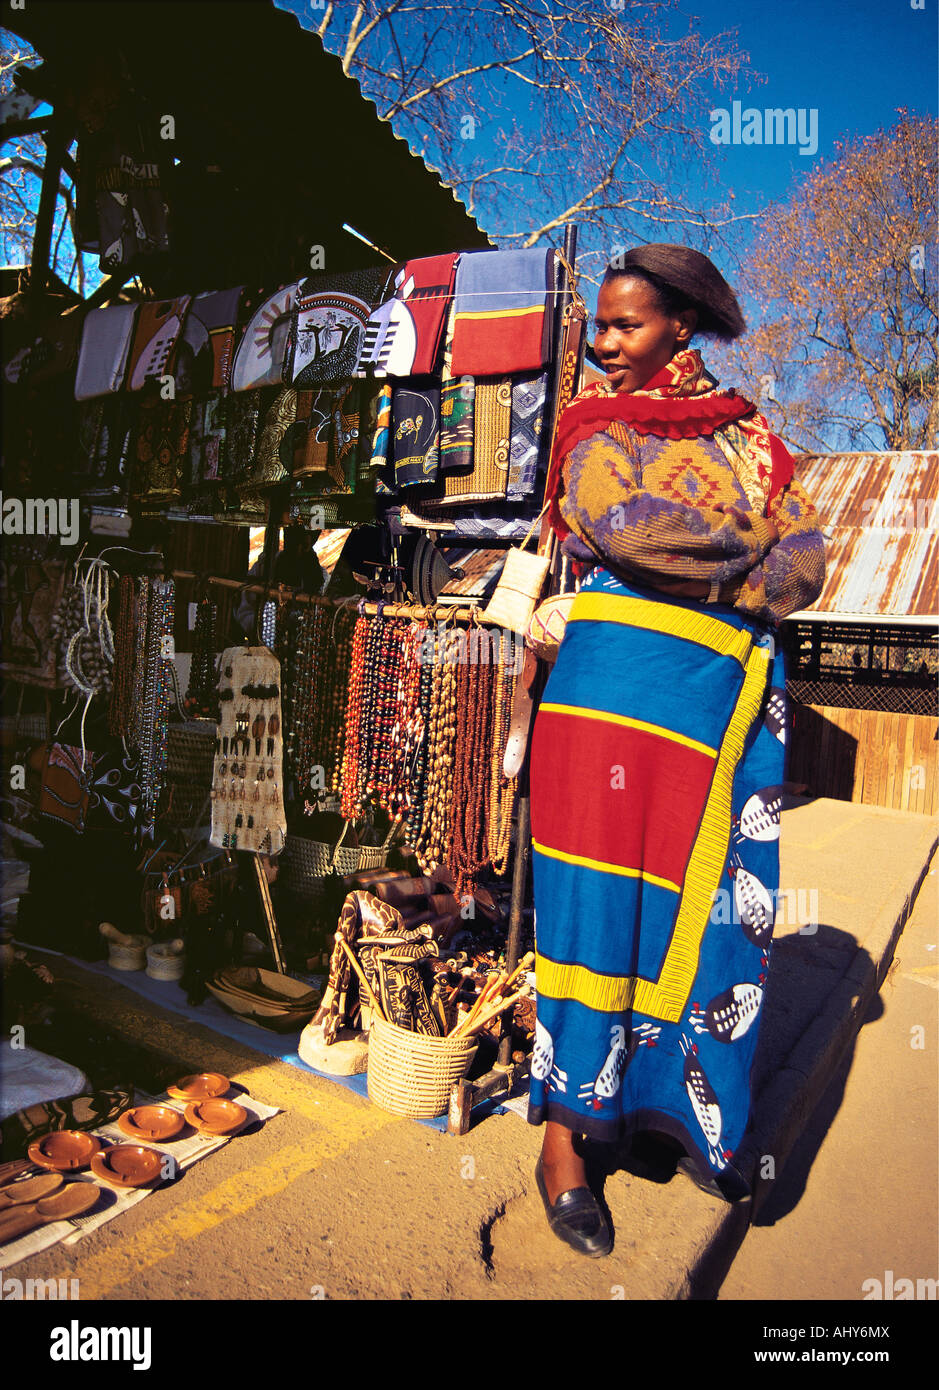 An African woman wearing traditional dress at her stall in Mbabane market Swaziland Stock Photo